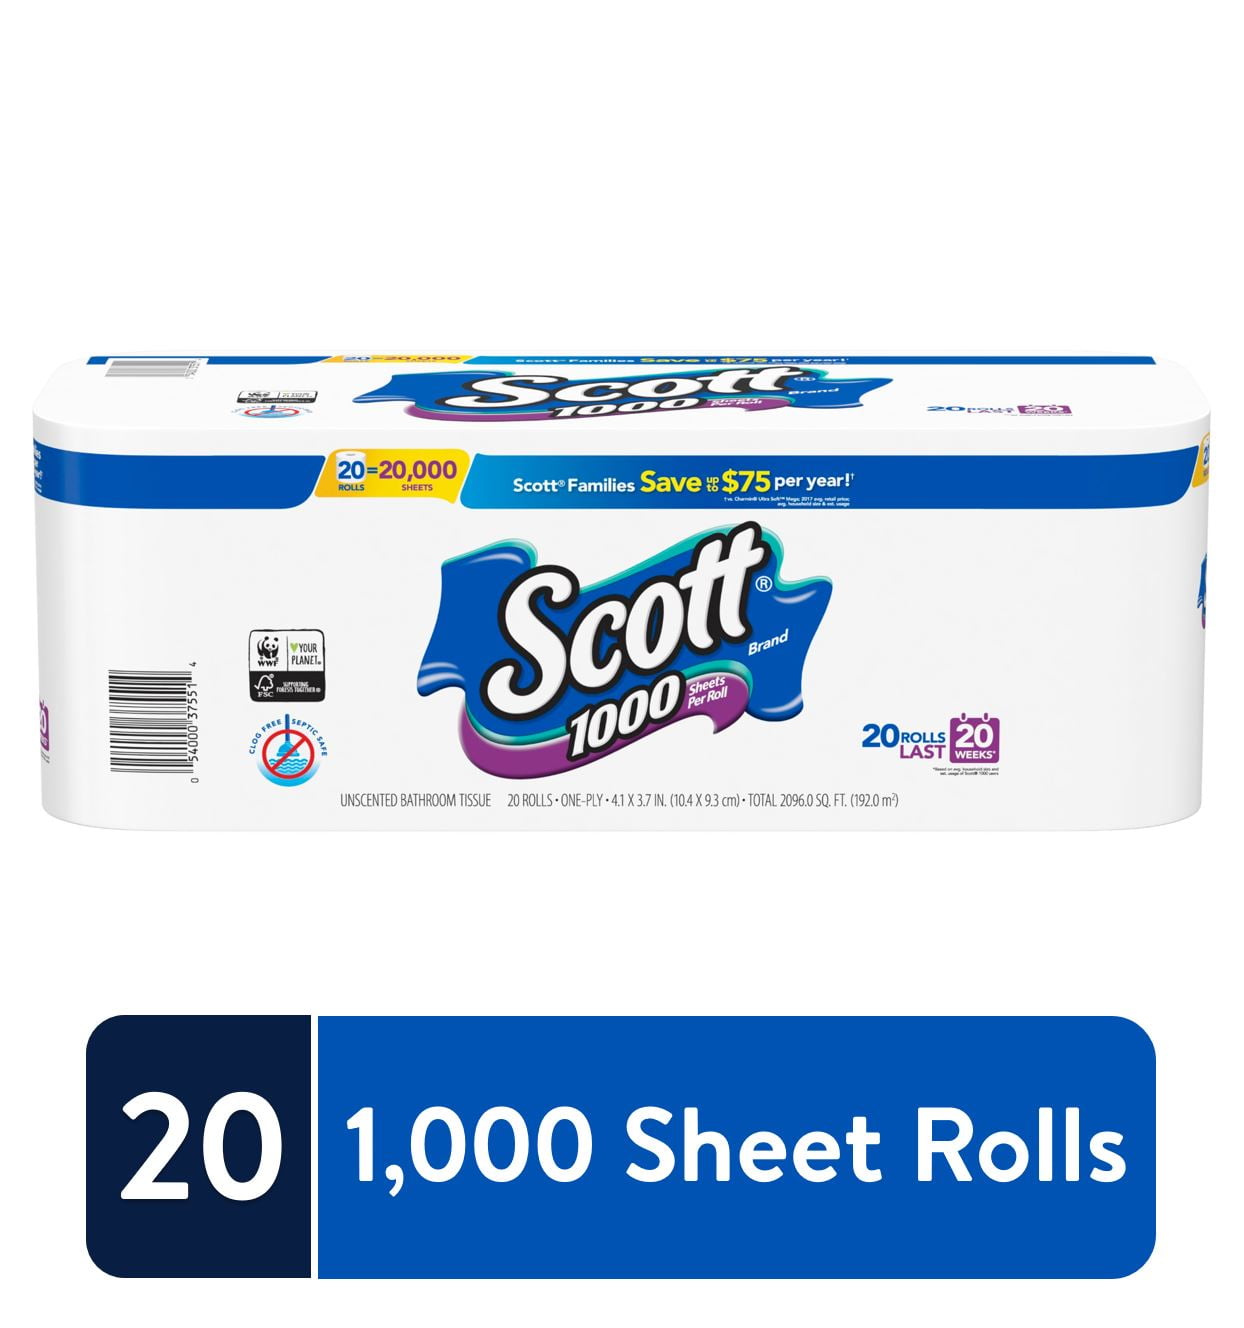 36 Count SCOTT Bath Tissue Roll for sale online 39600 Sheets 